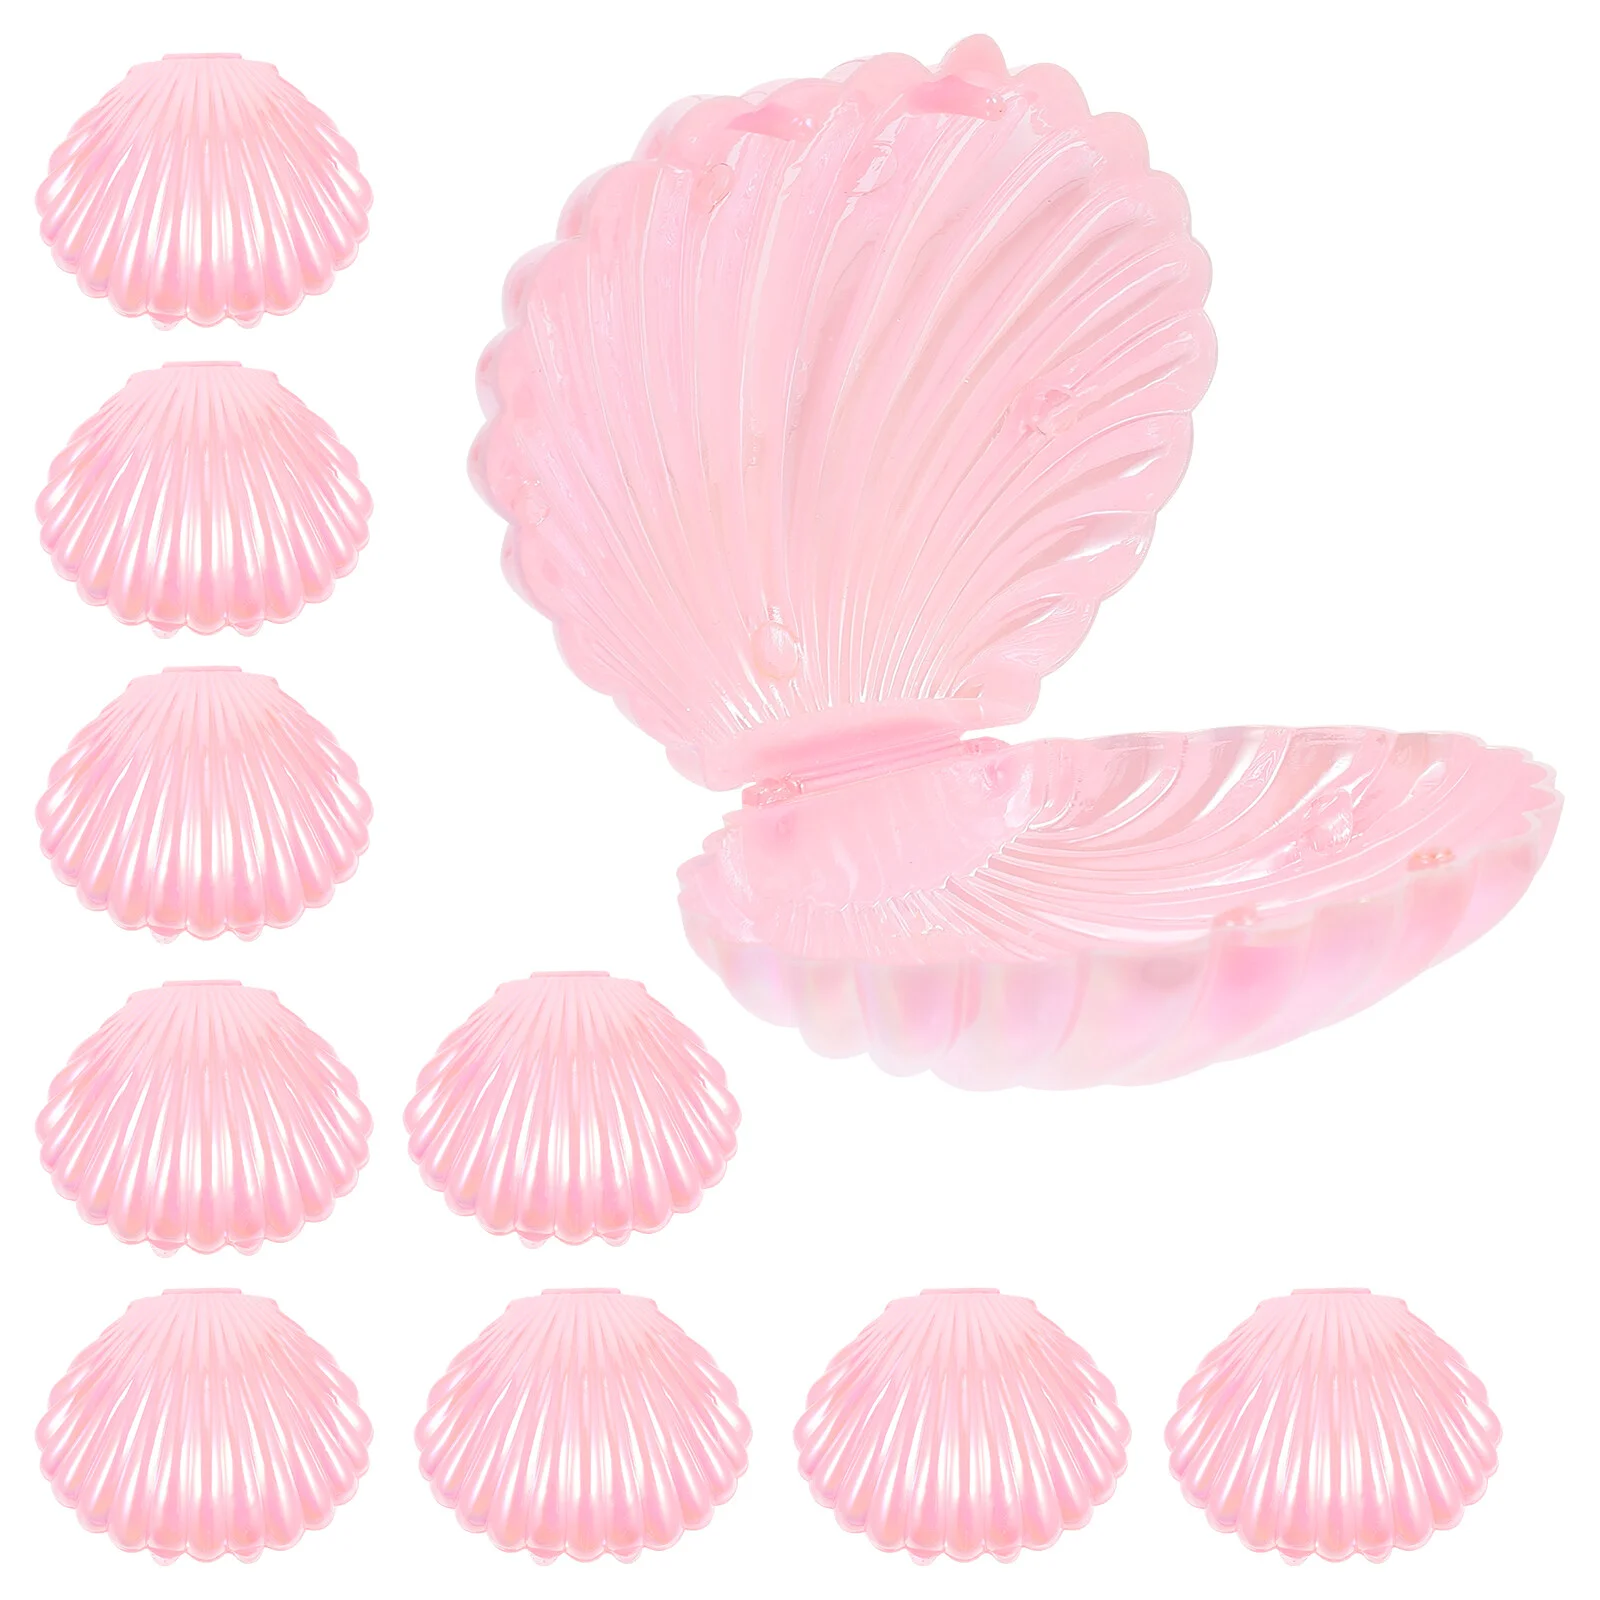 

10 Pcs Jewelry Tray Candy Holder Small Jar Plastic Container Gift Box Seashell Pp Dish Containers